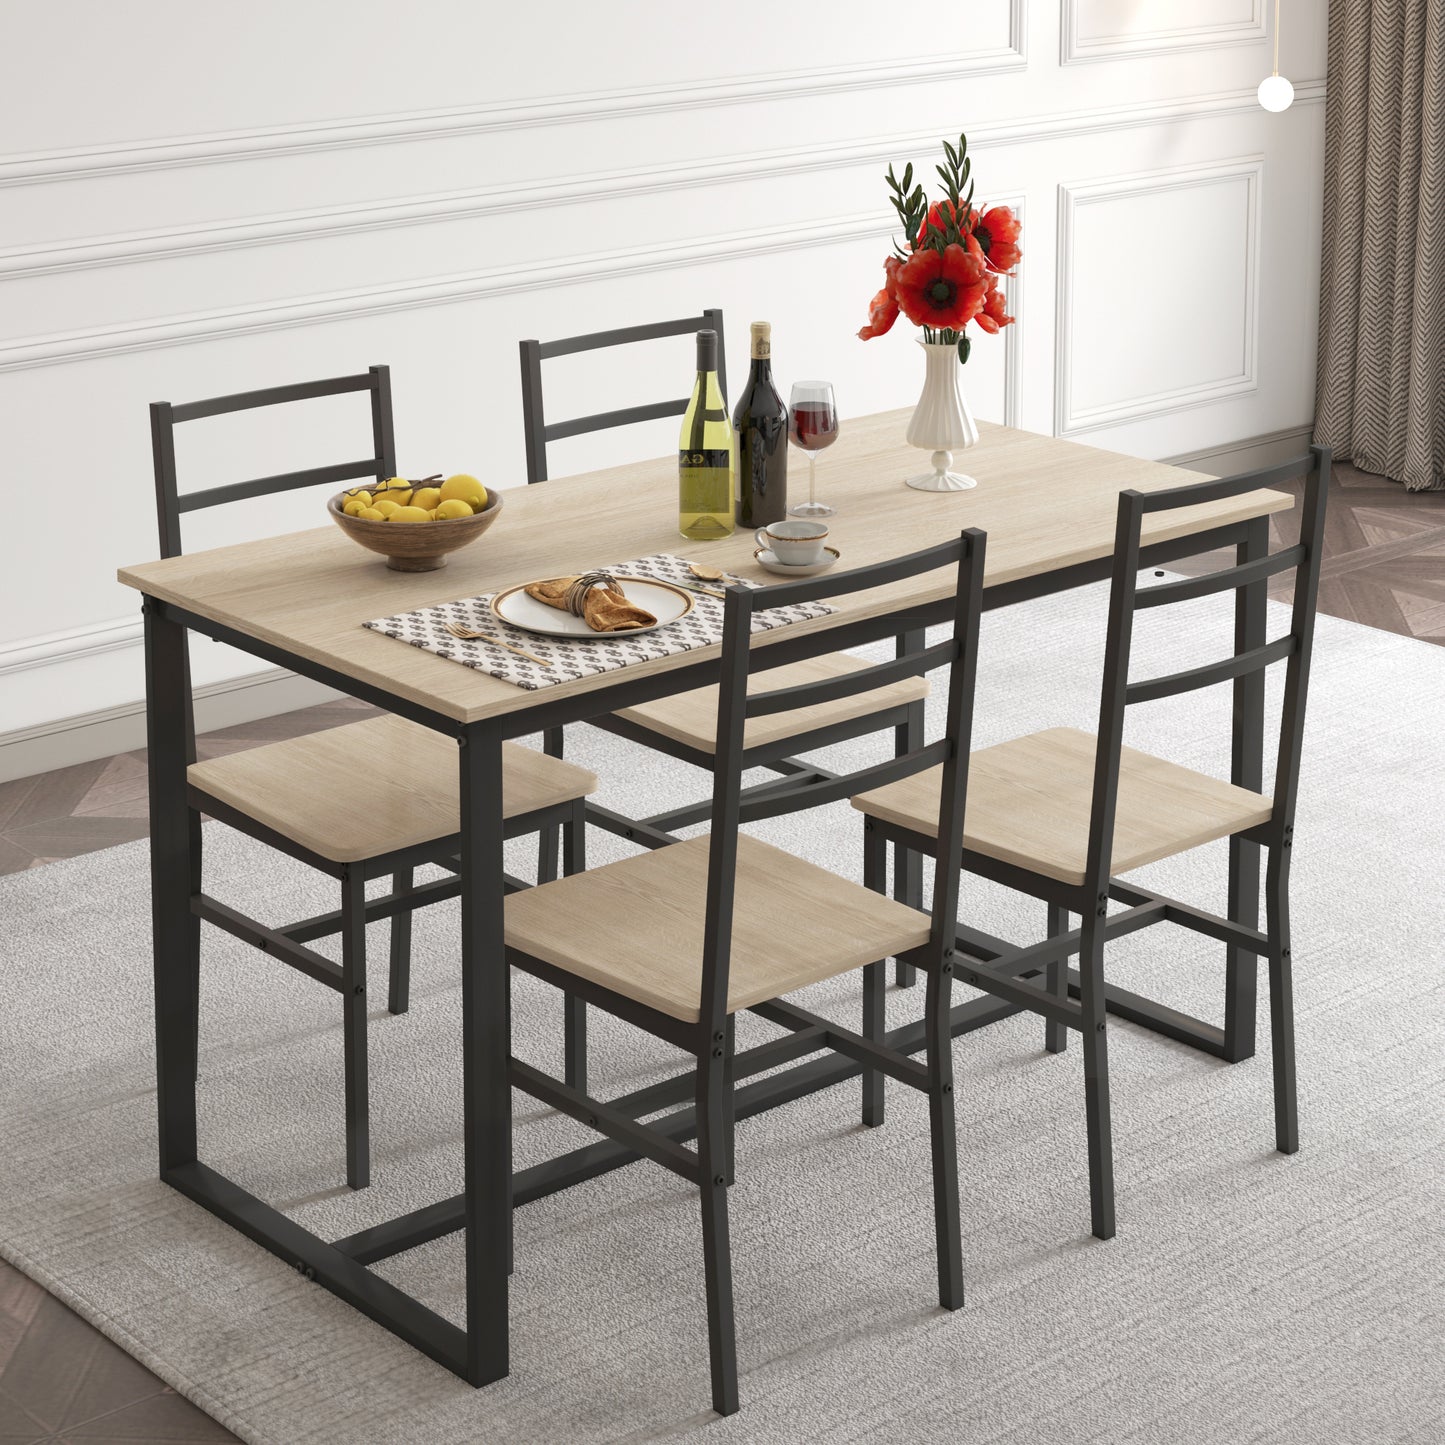 5 Piece Dining Set, Dining Table Set for 4, Modern Dining Room Table Set with 4 Chairs, Table and Chairs Set with Wooden Tabletop and Metal Frame, for Kitchen, Living Room, Restaurant, D6111